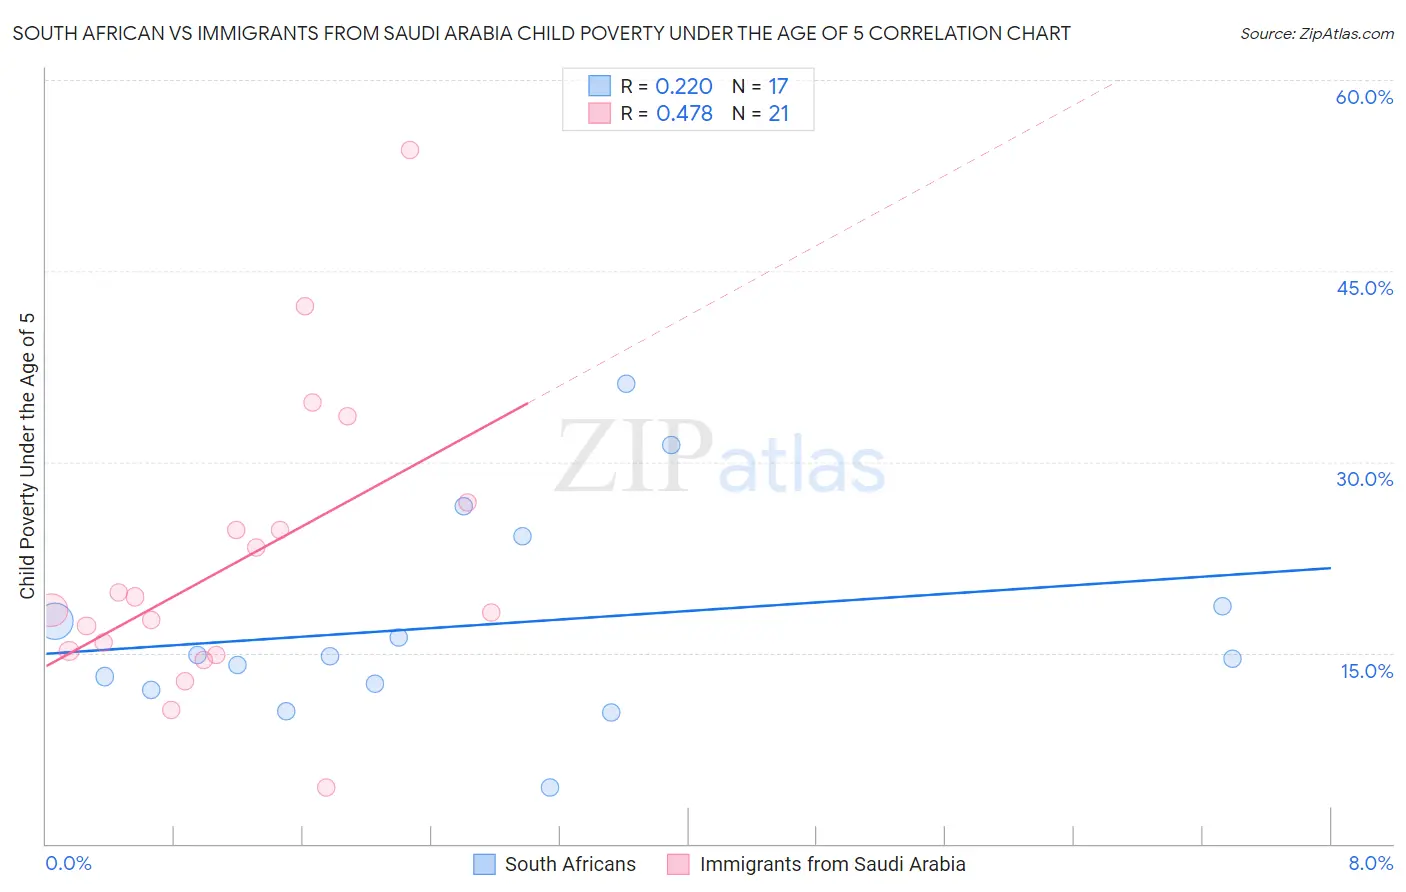 South African vs Immigrants from Saudi Arabia Child Poverty Under the Age of 5